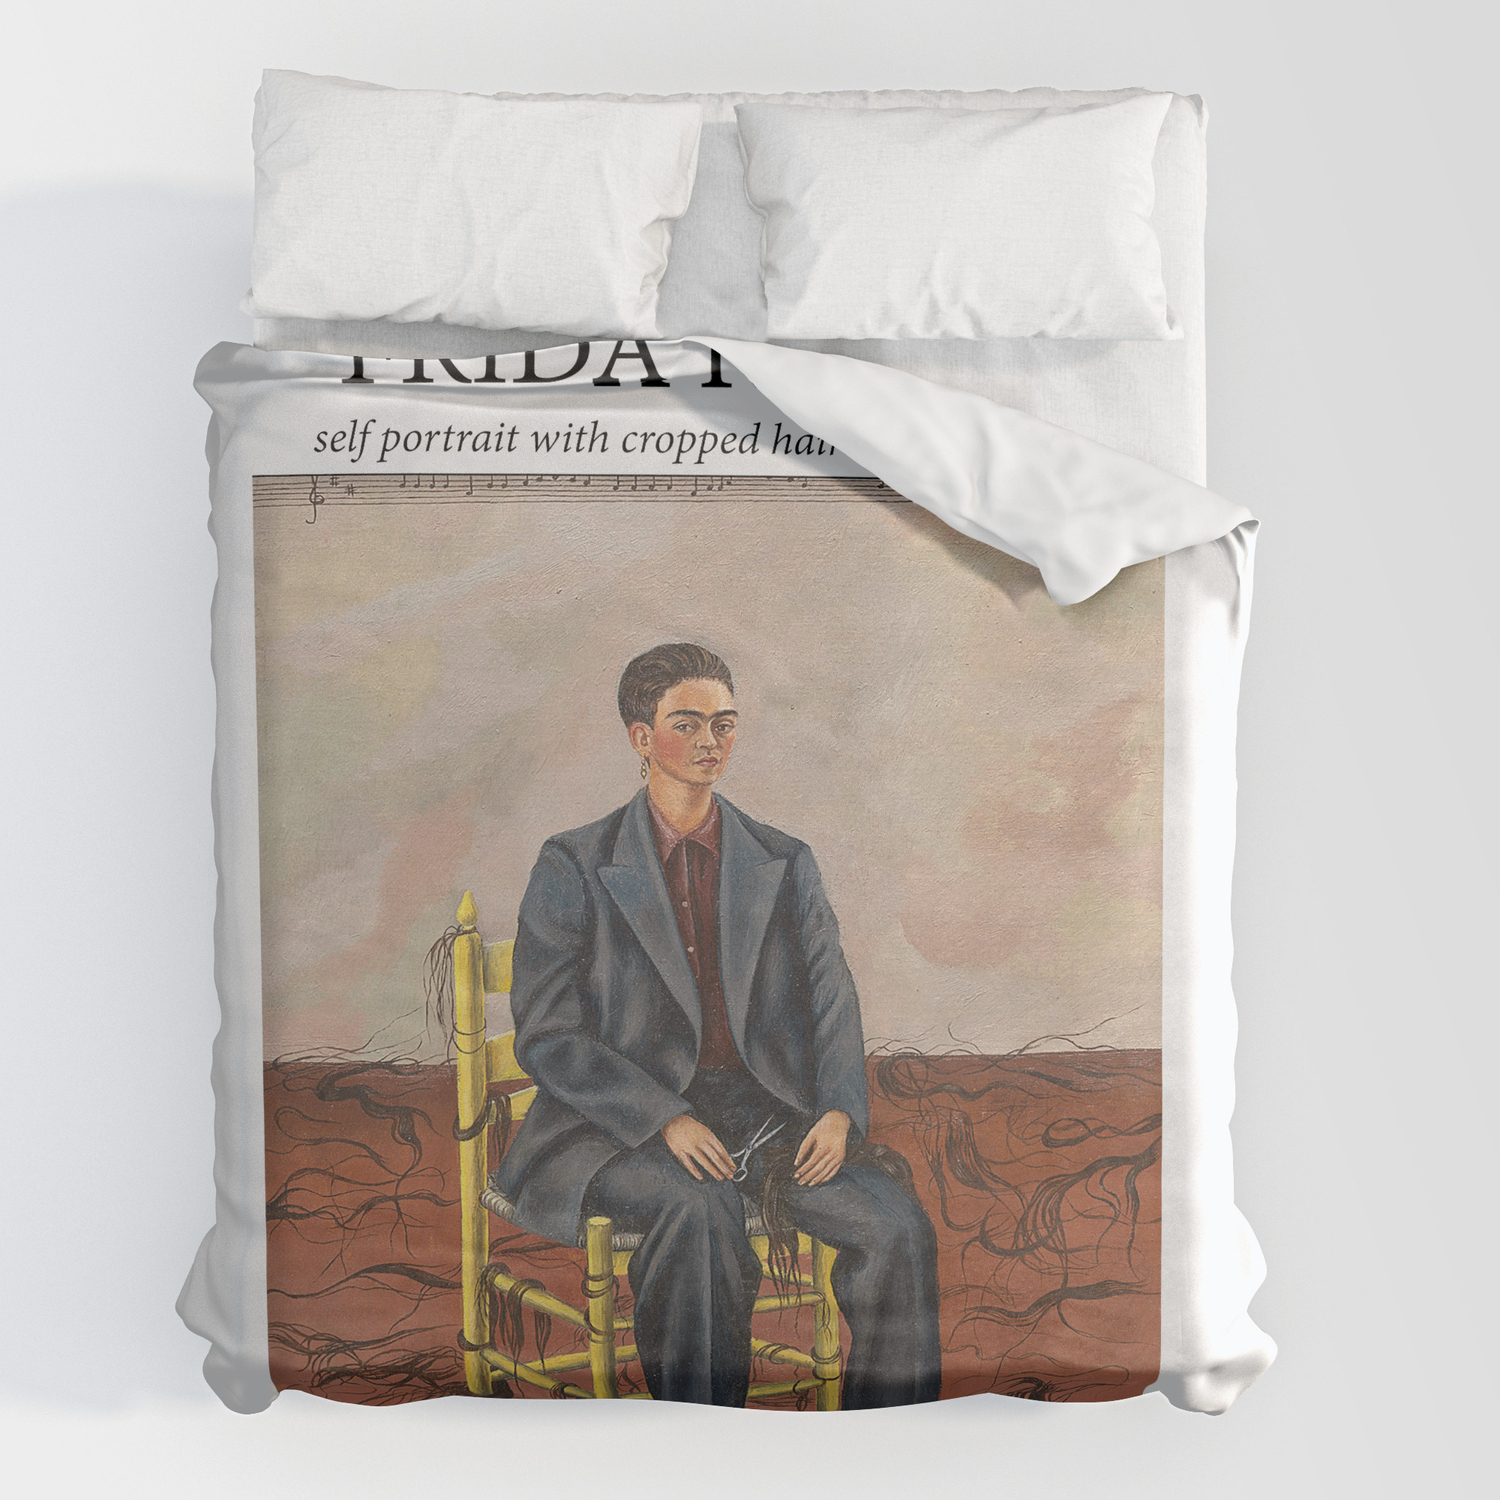 self portrait with cropped hair by Frida kahlo by Frida Kahlo (1940) Duvet  Cover by Santosh | Society6